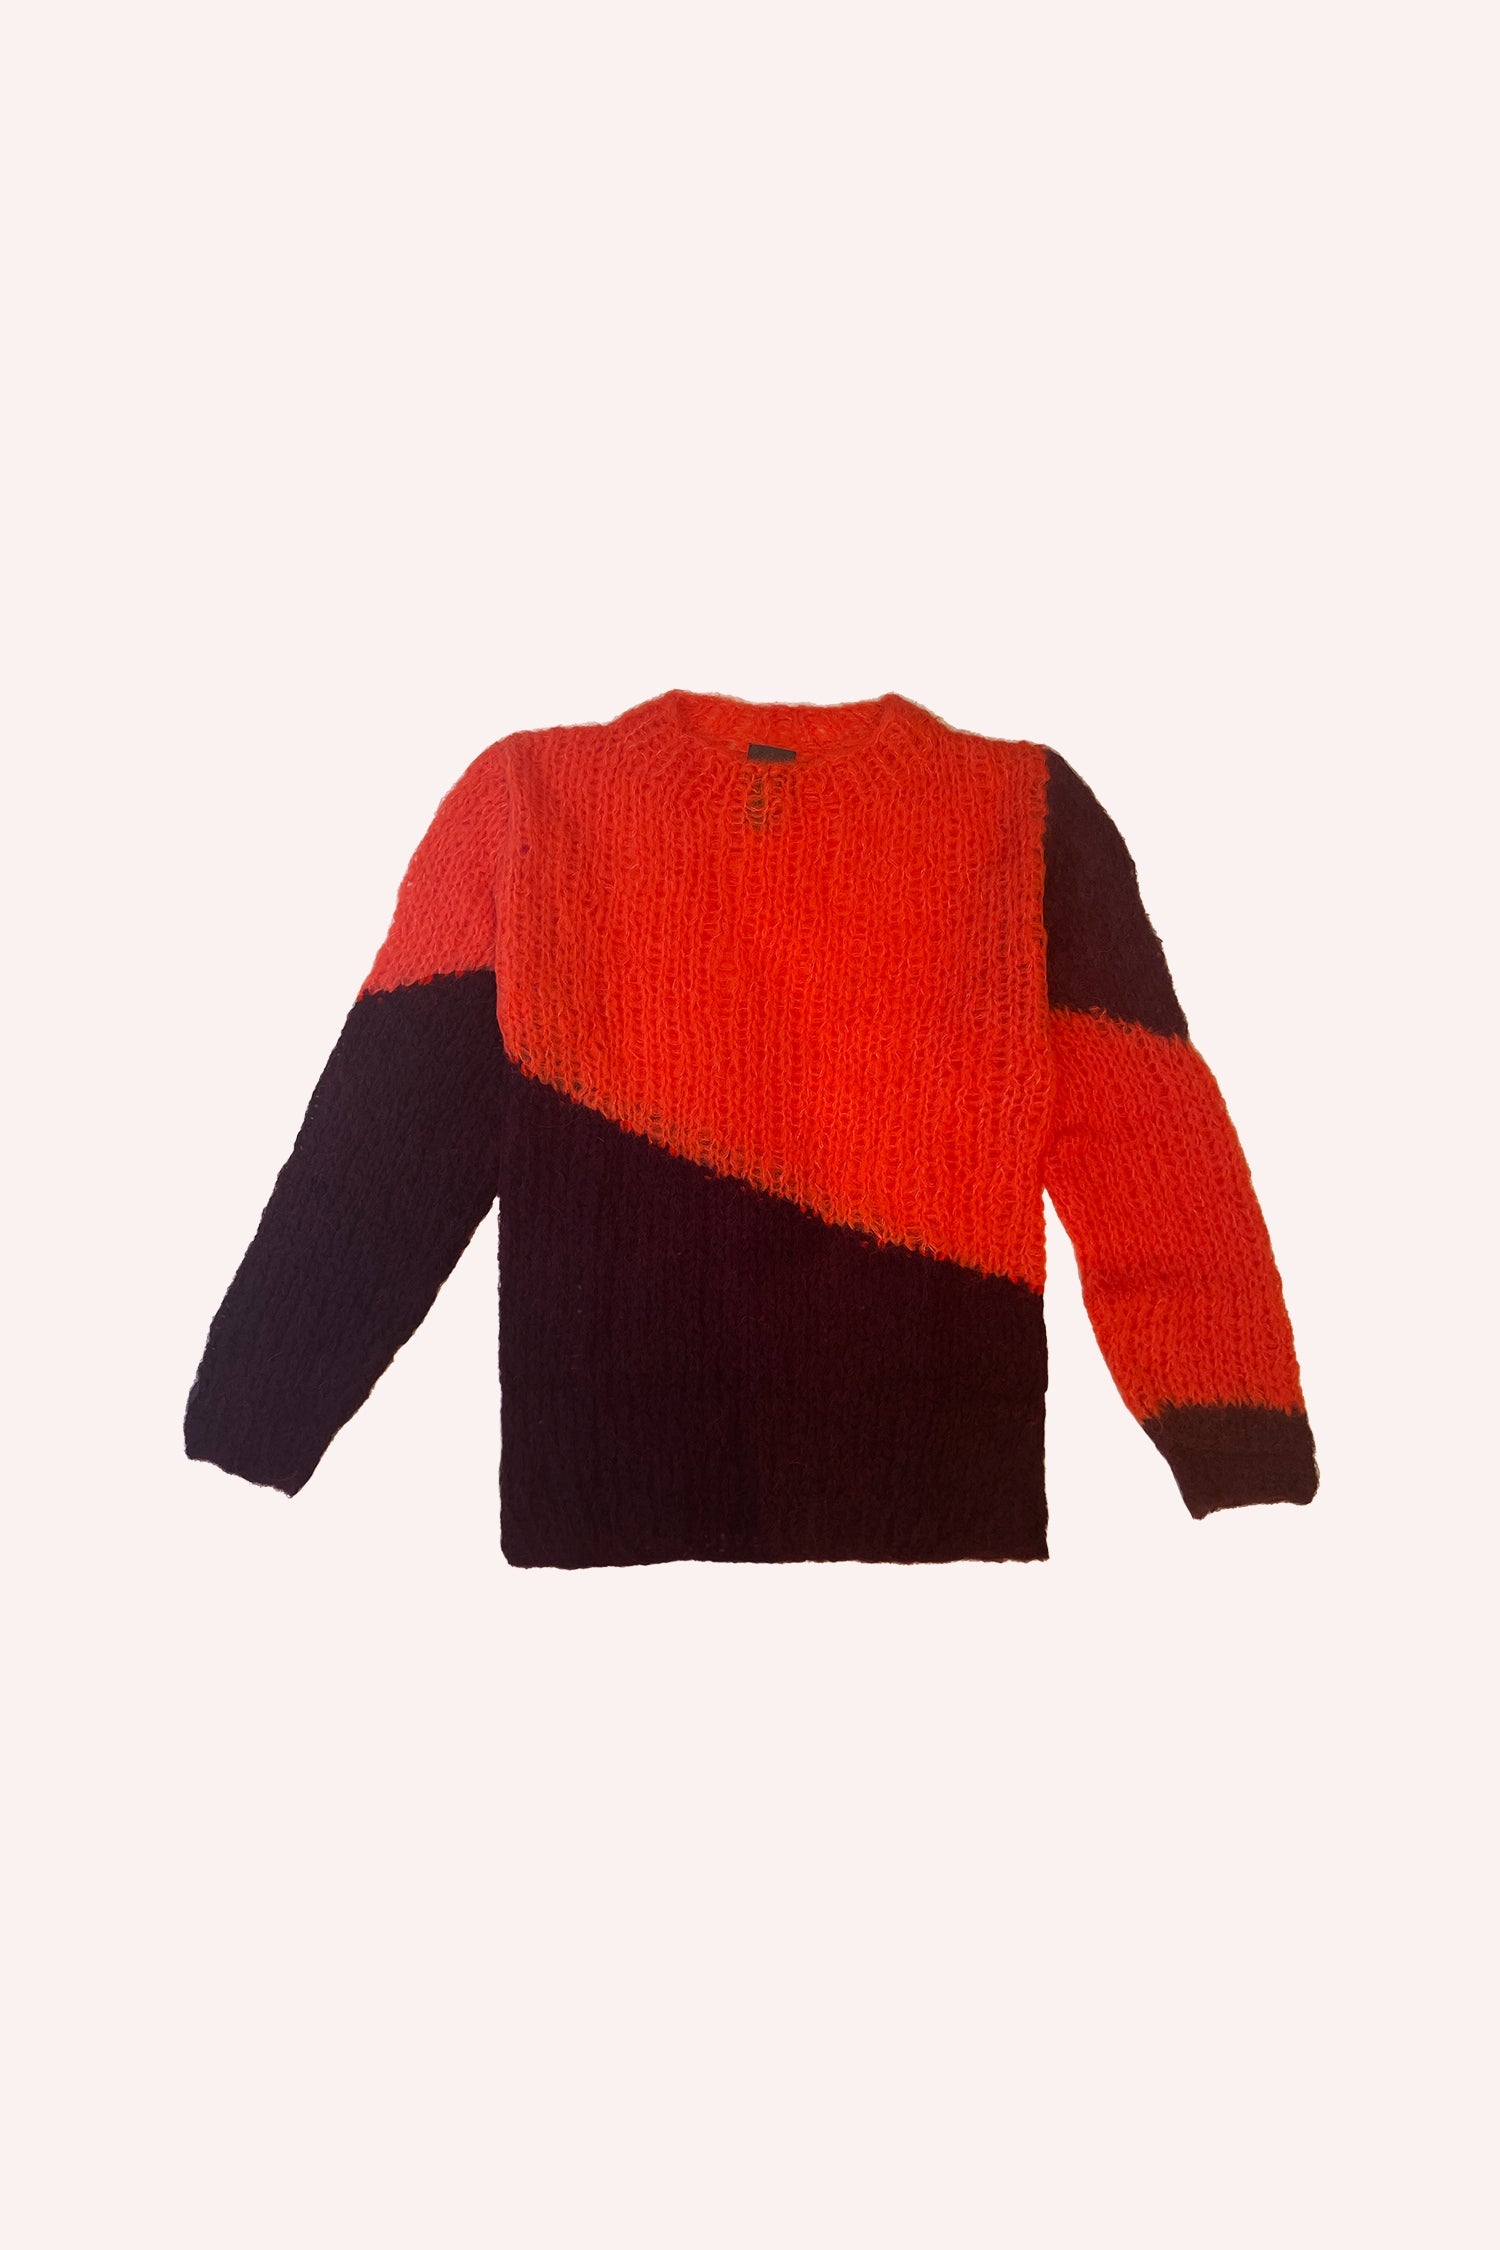 NuWave sweater with long sleeves. The top is orange/red, with a black diagonal, running from the left bottom to the full right arm